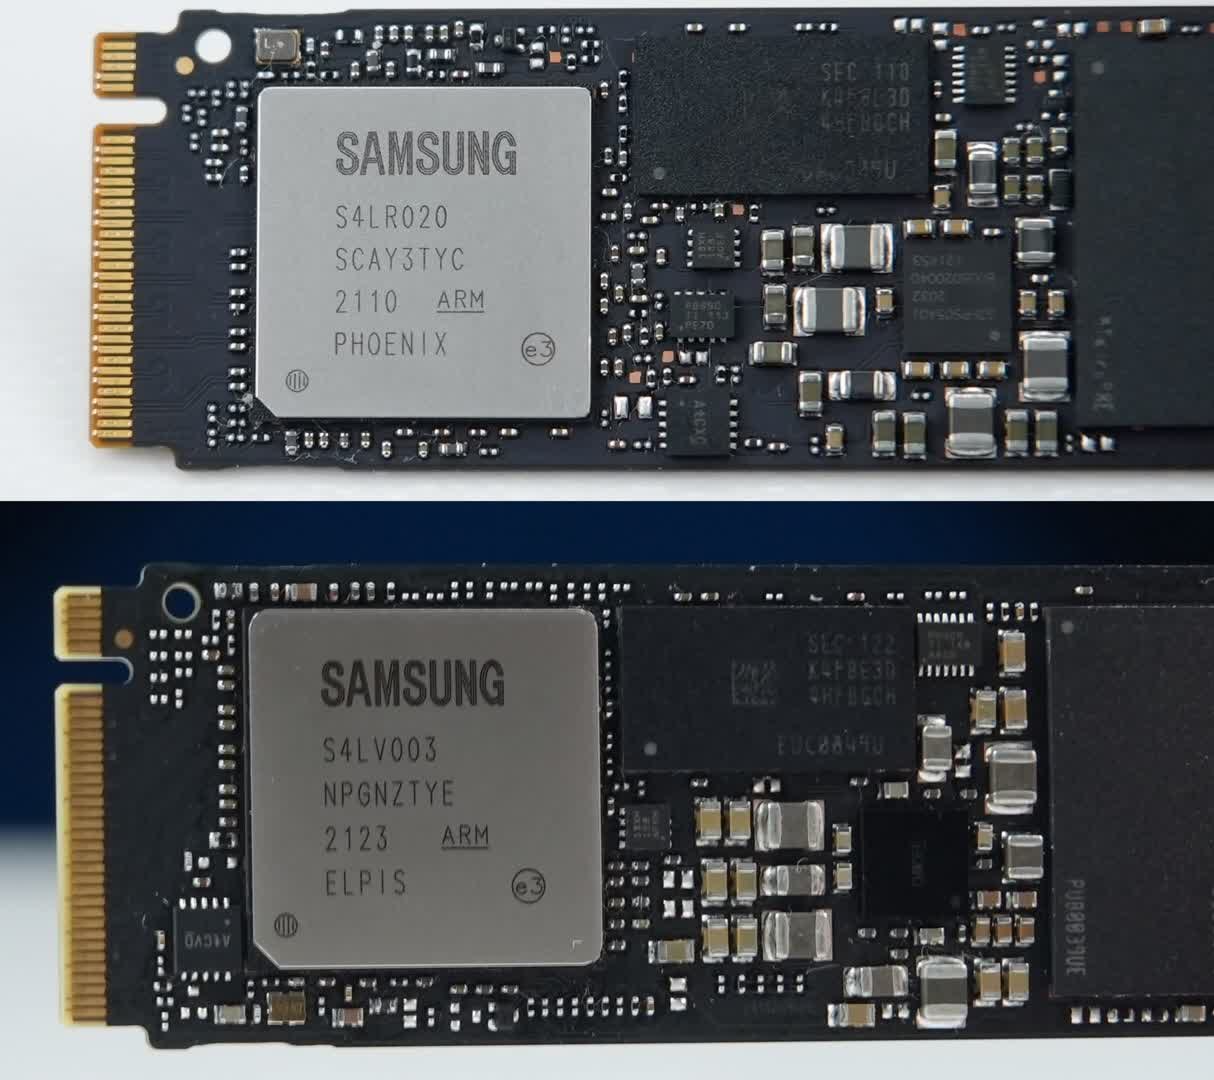 Samsung is swapping parts in their 970 Plus and performance TechSpot